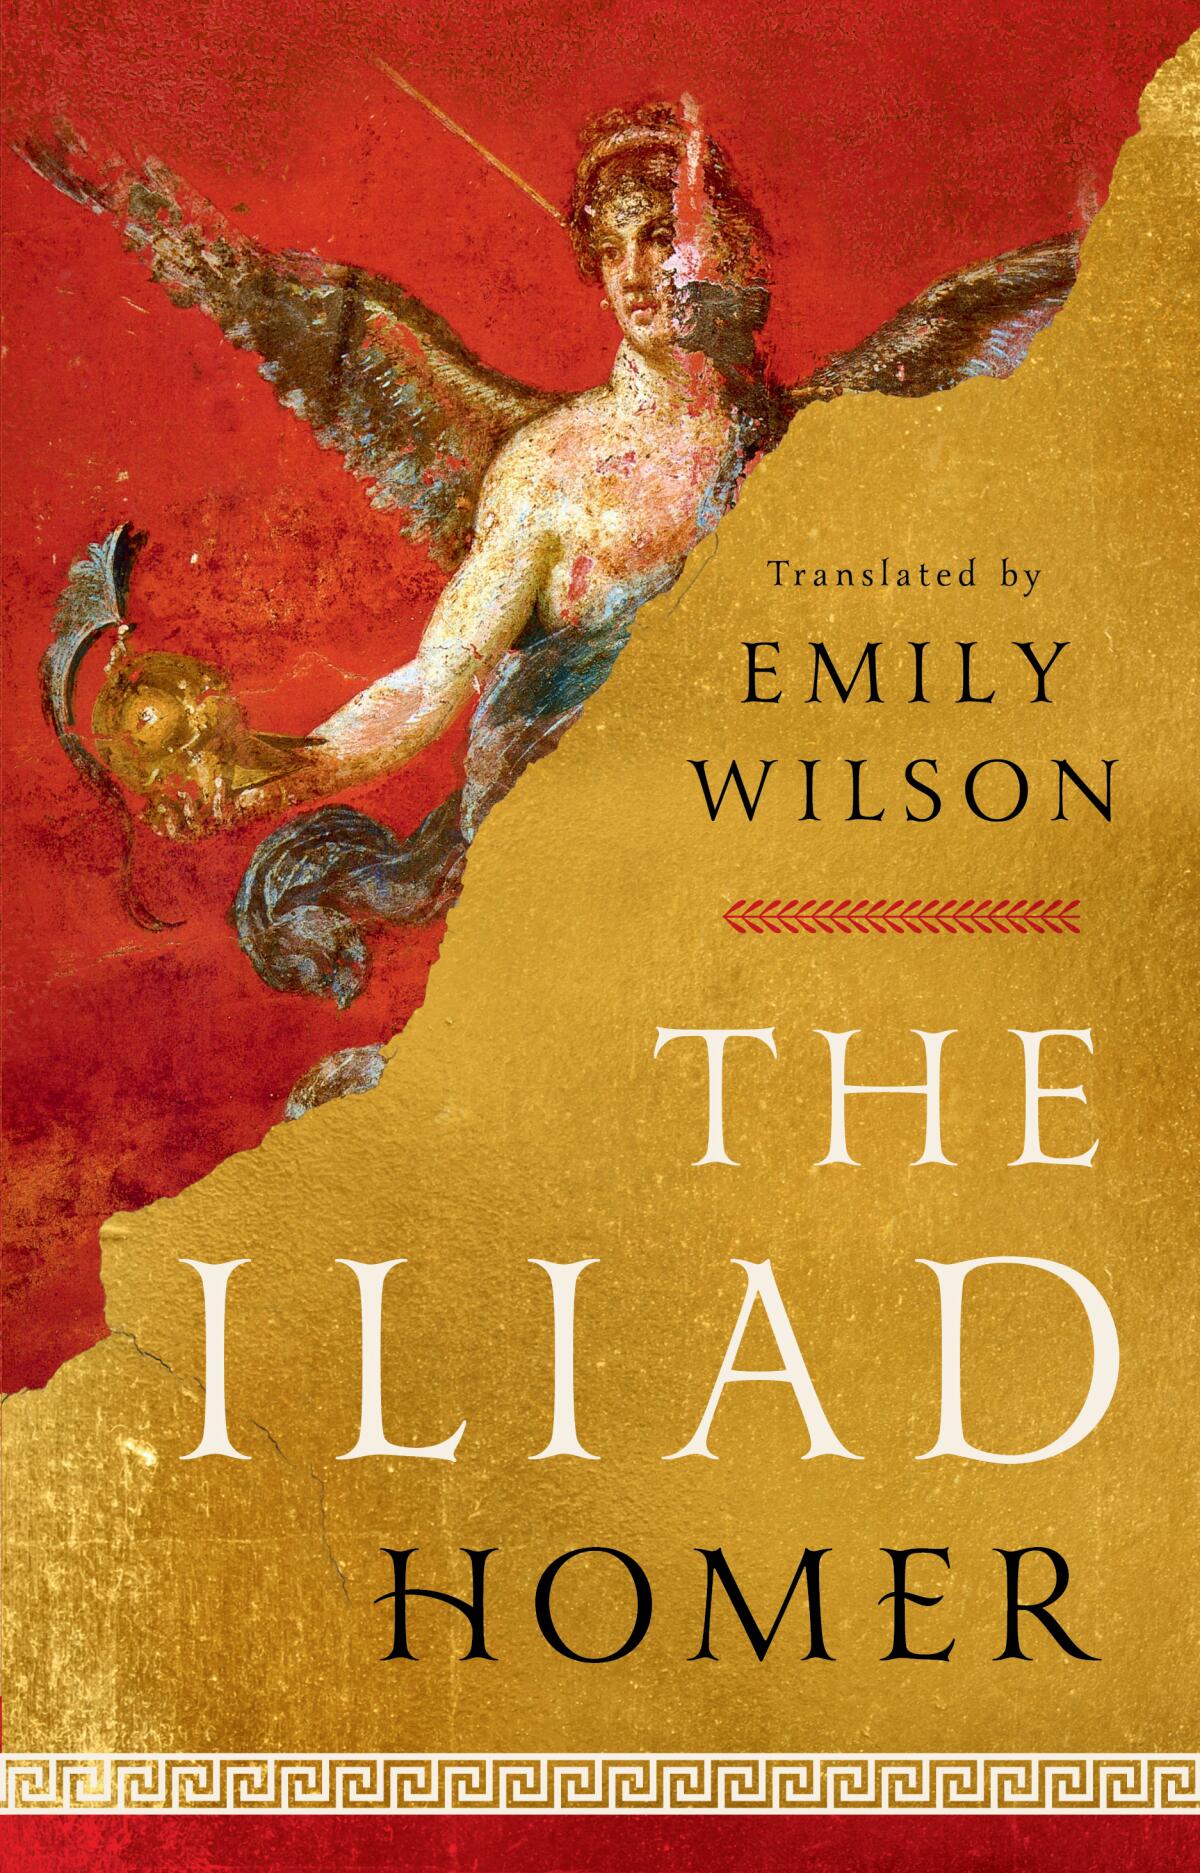 Homer's "The Iliad," translated by Emily Wilson.